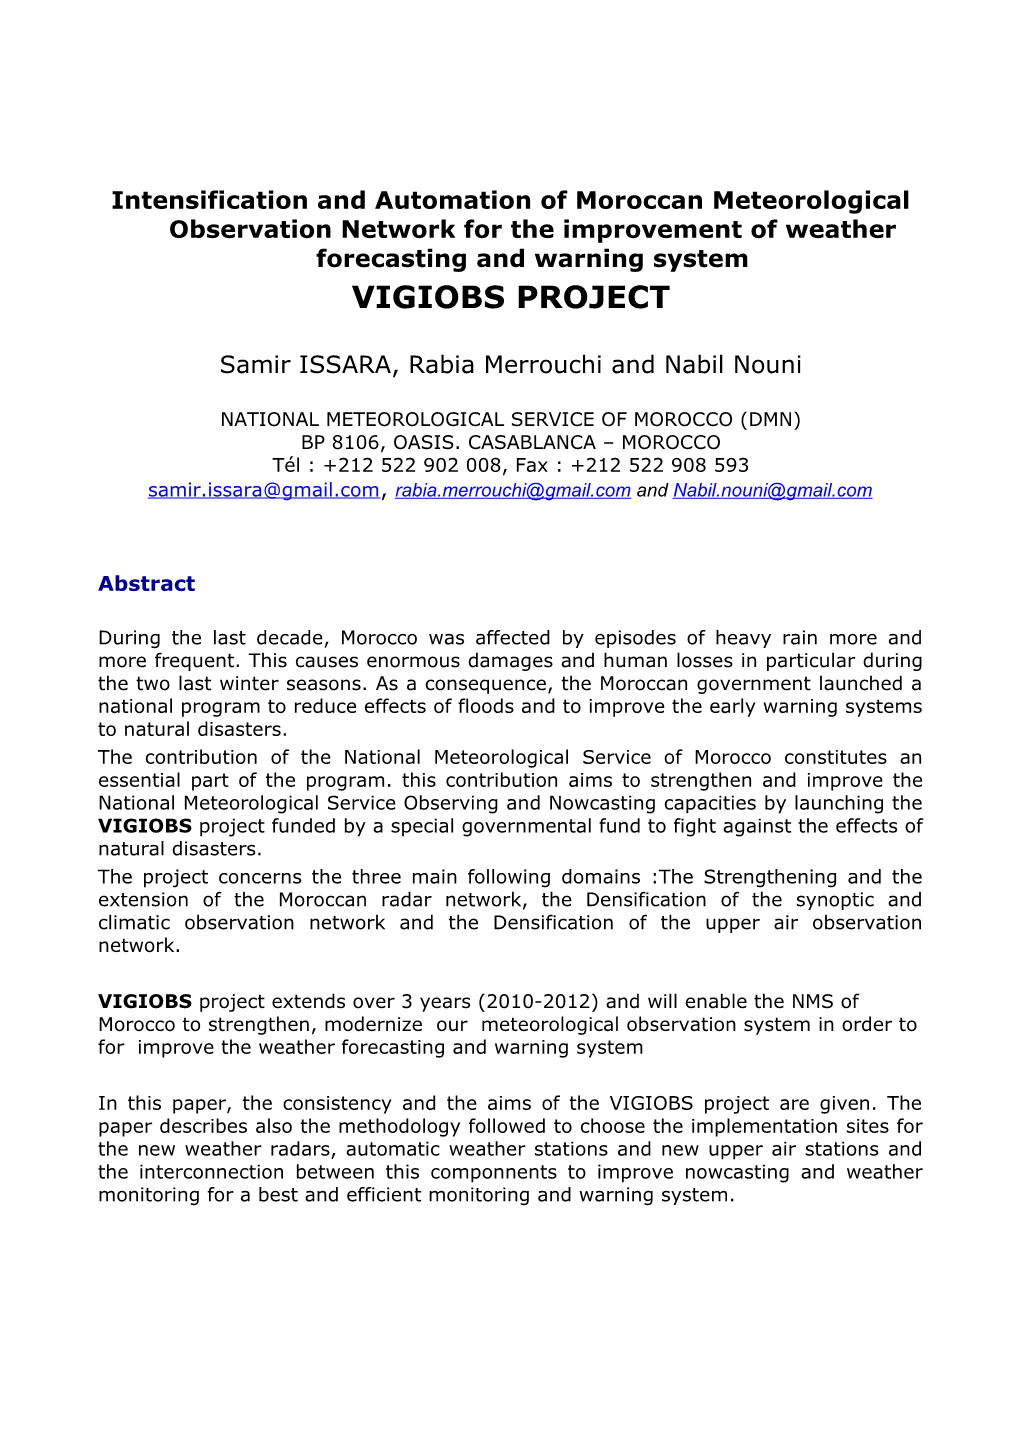 Intensification and Automation of Moroccan Meteorological Observation Network for The